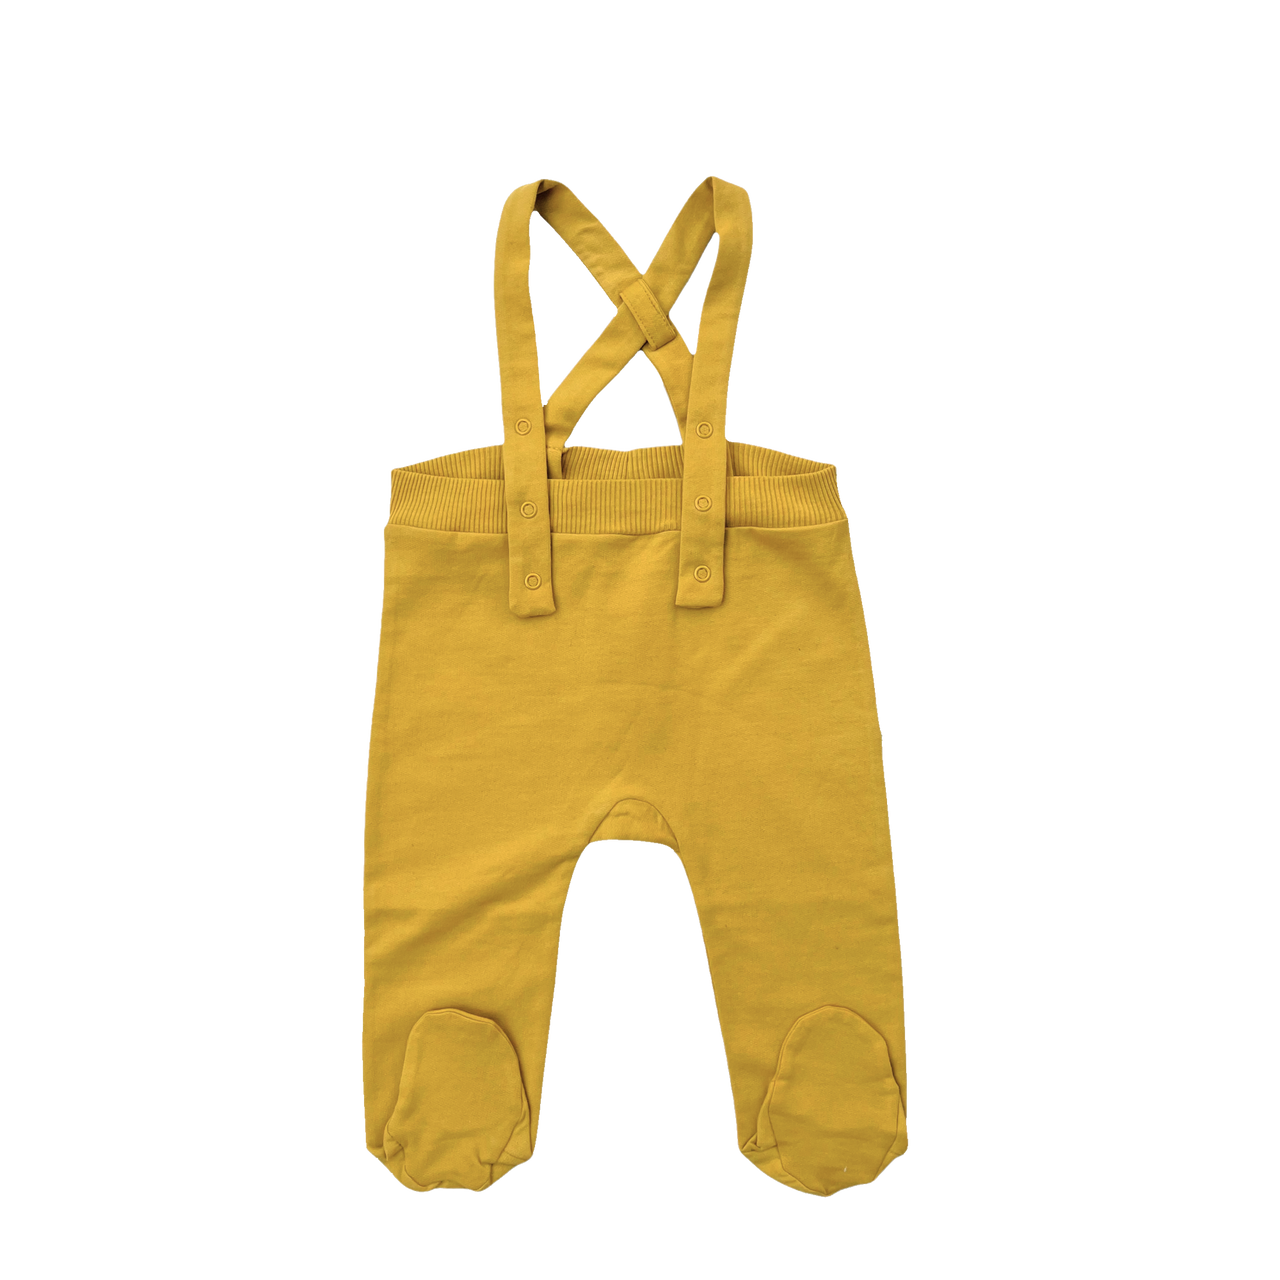 "Seed" Baby Dungarees - Mustard